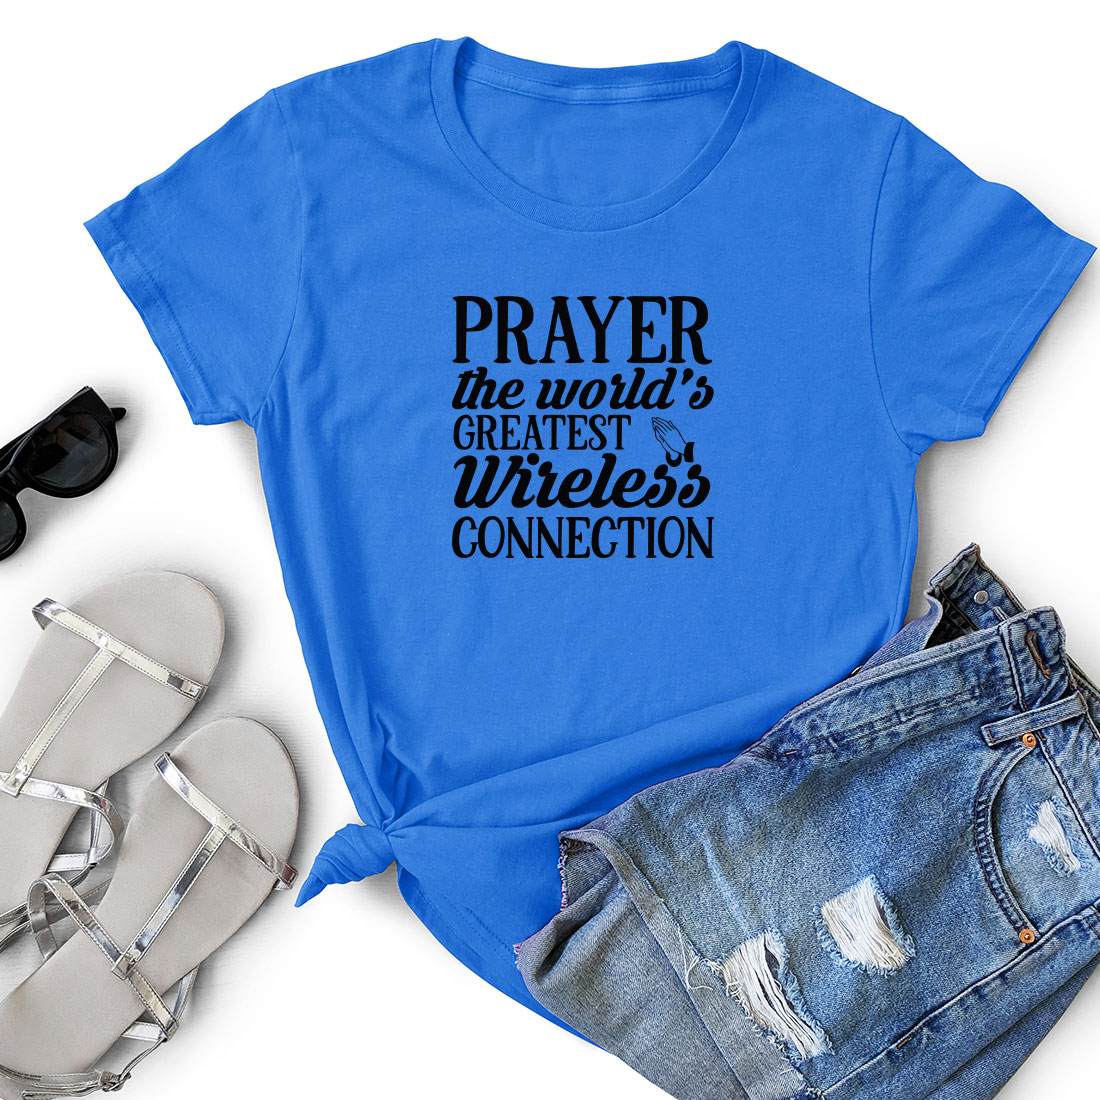 T - shirt that says prayer the world's greatest wireless connection.